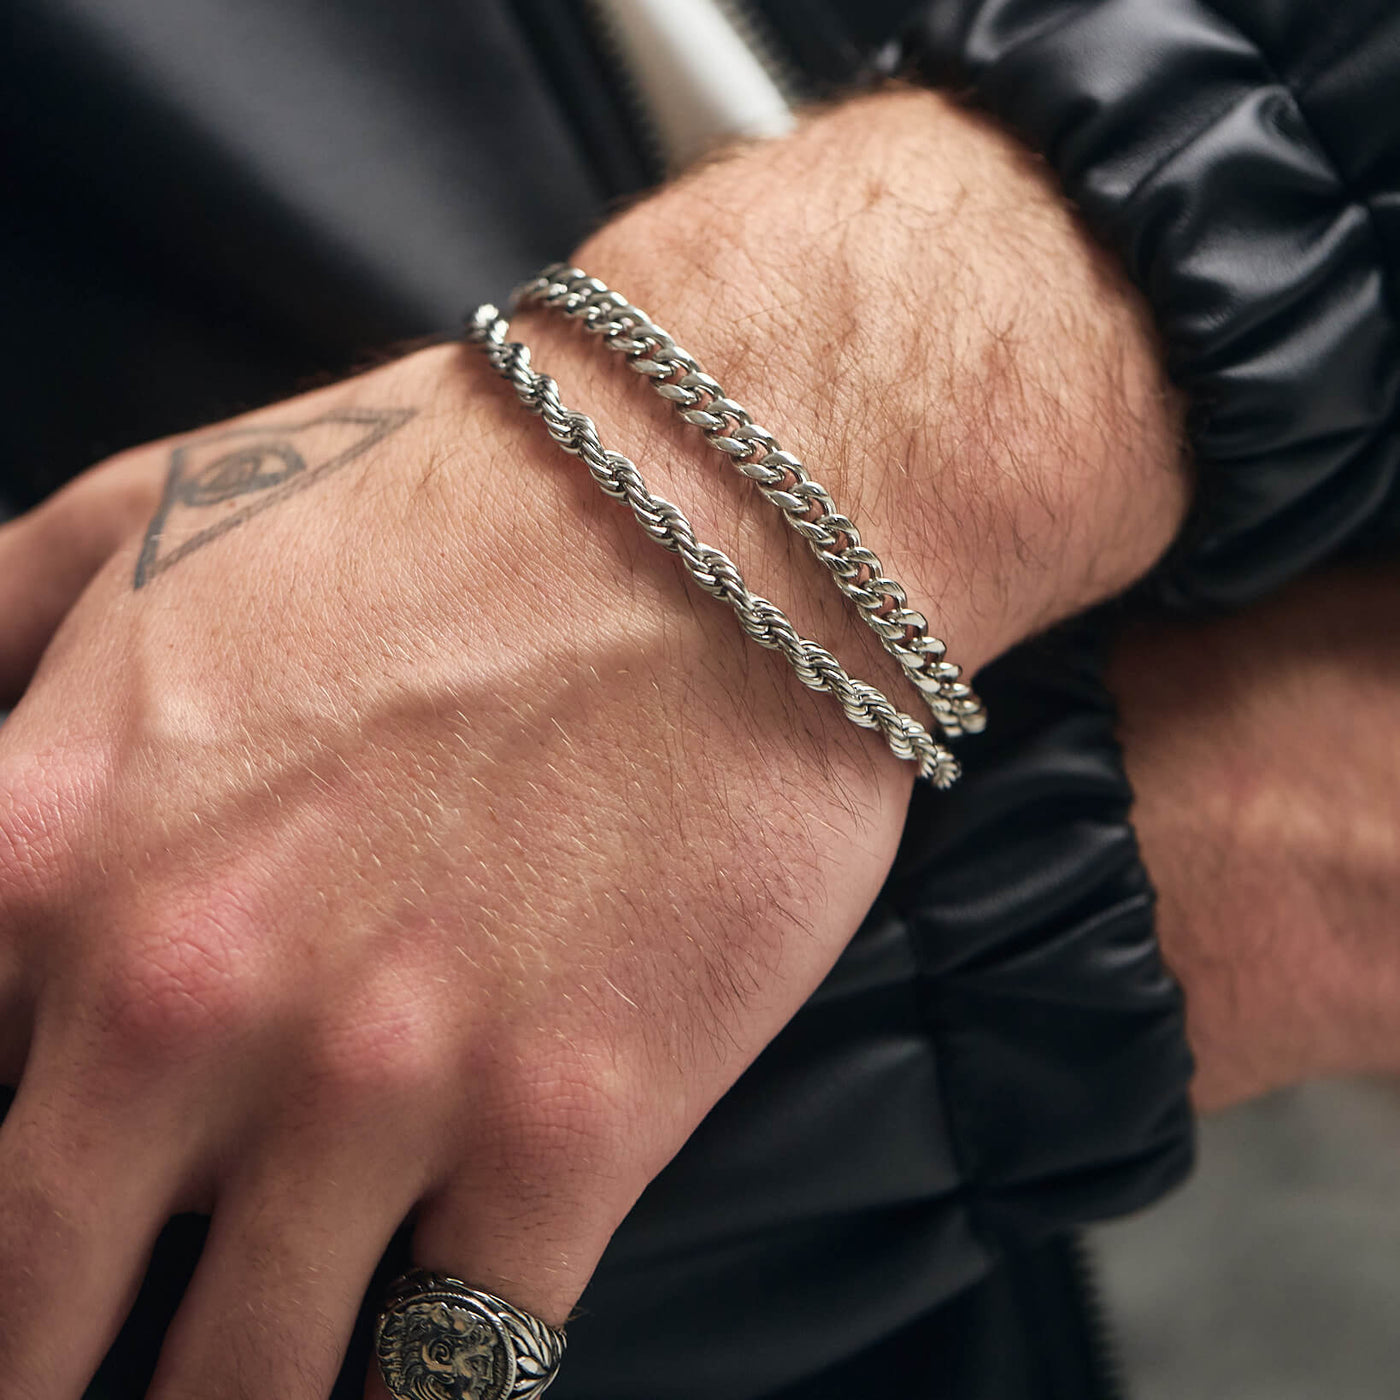 CLEAN ROPE BRACELET. - 2MM WHITE GOLD | Drippy Amsterdam